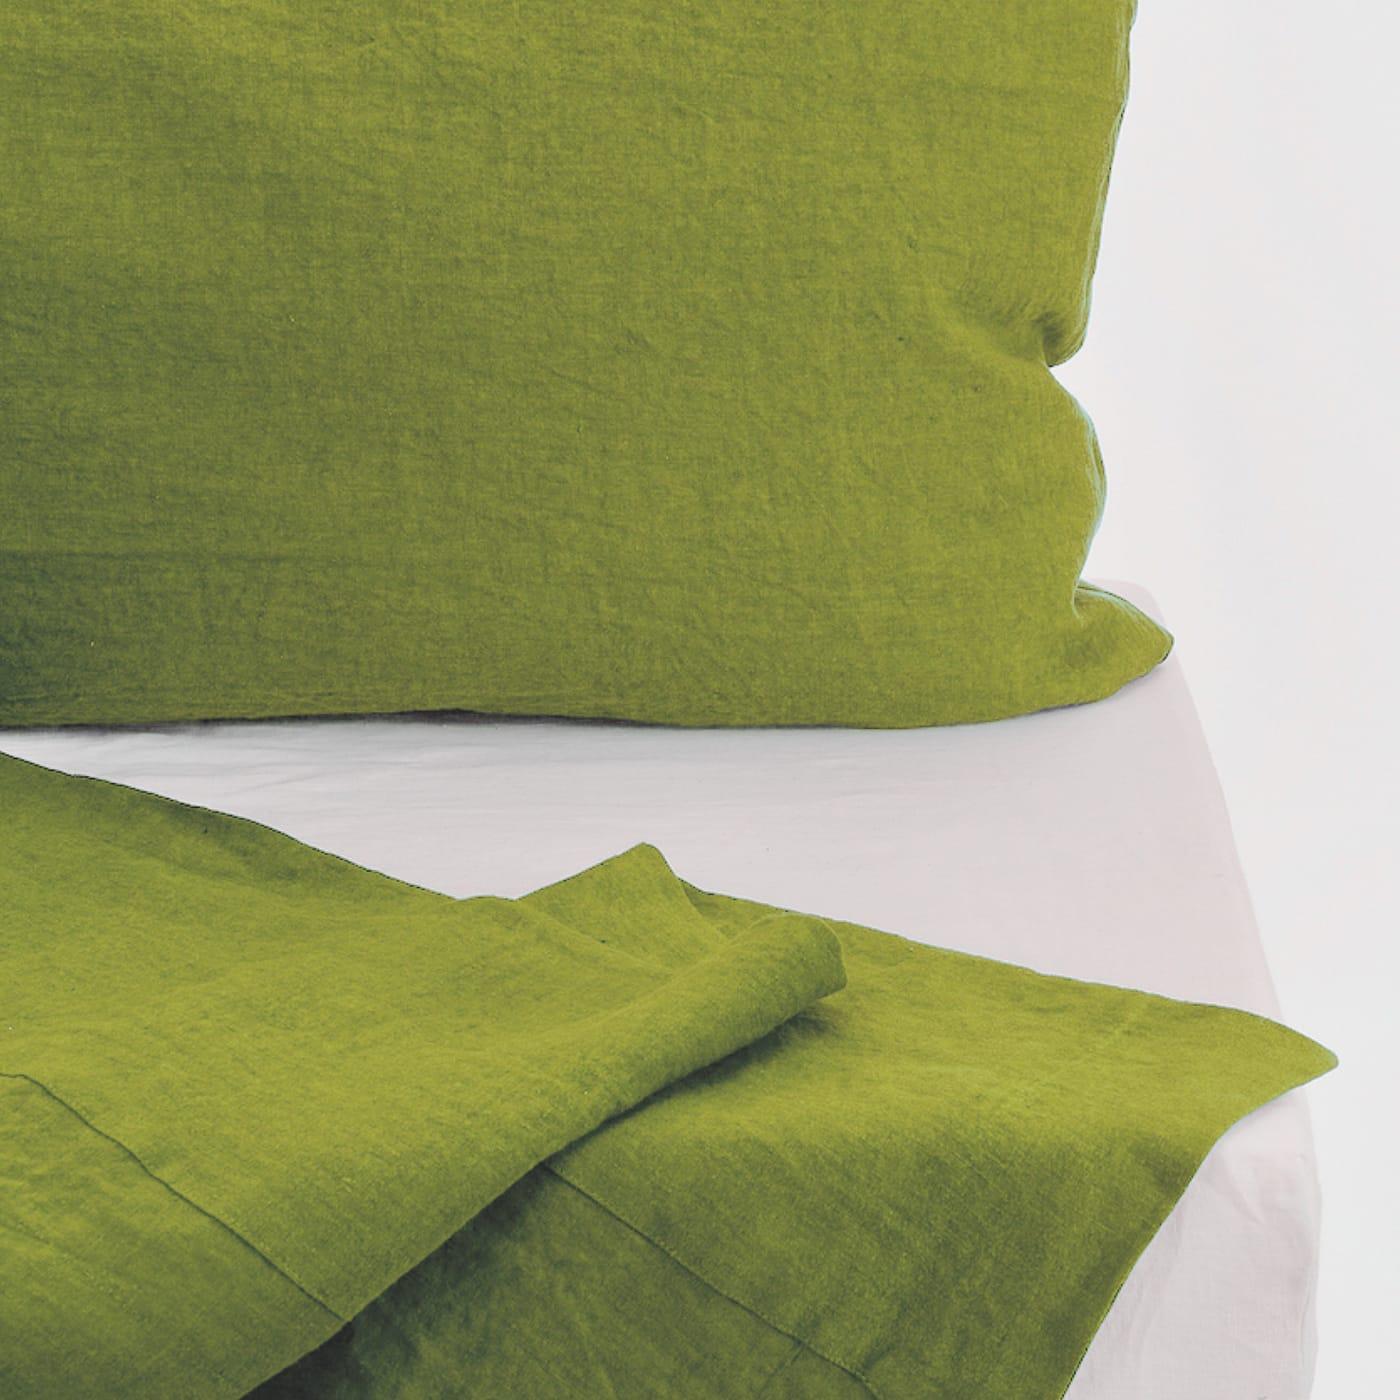 An elegant and colourful set entirely handmade of the finest linen, this set comprises a top sheet with matching pillowcases dyed in a sophisticated moss green, and a white fitted sheet that will fit a 30 cm-deep mattress. The delicate hue of the